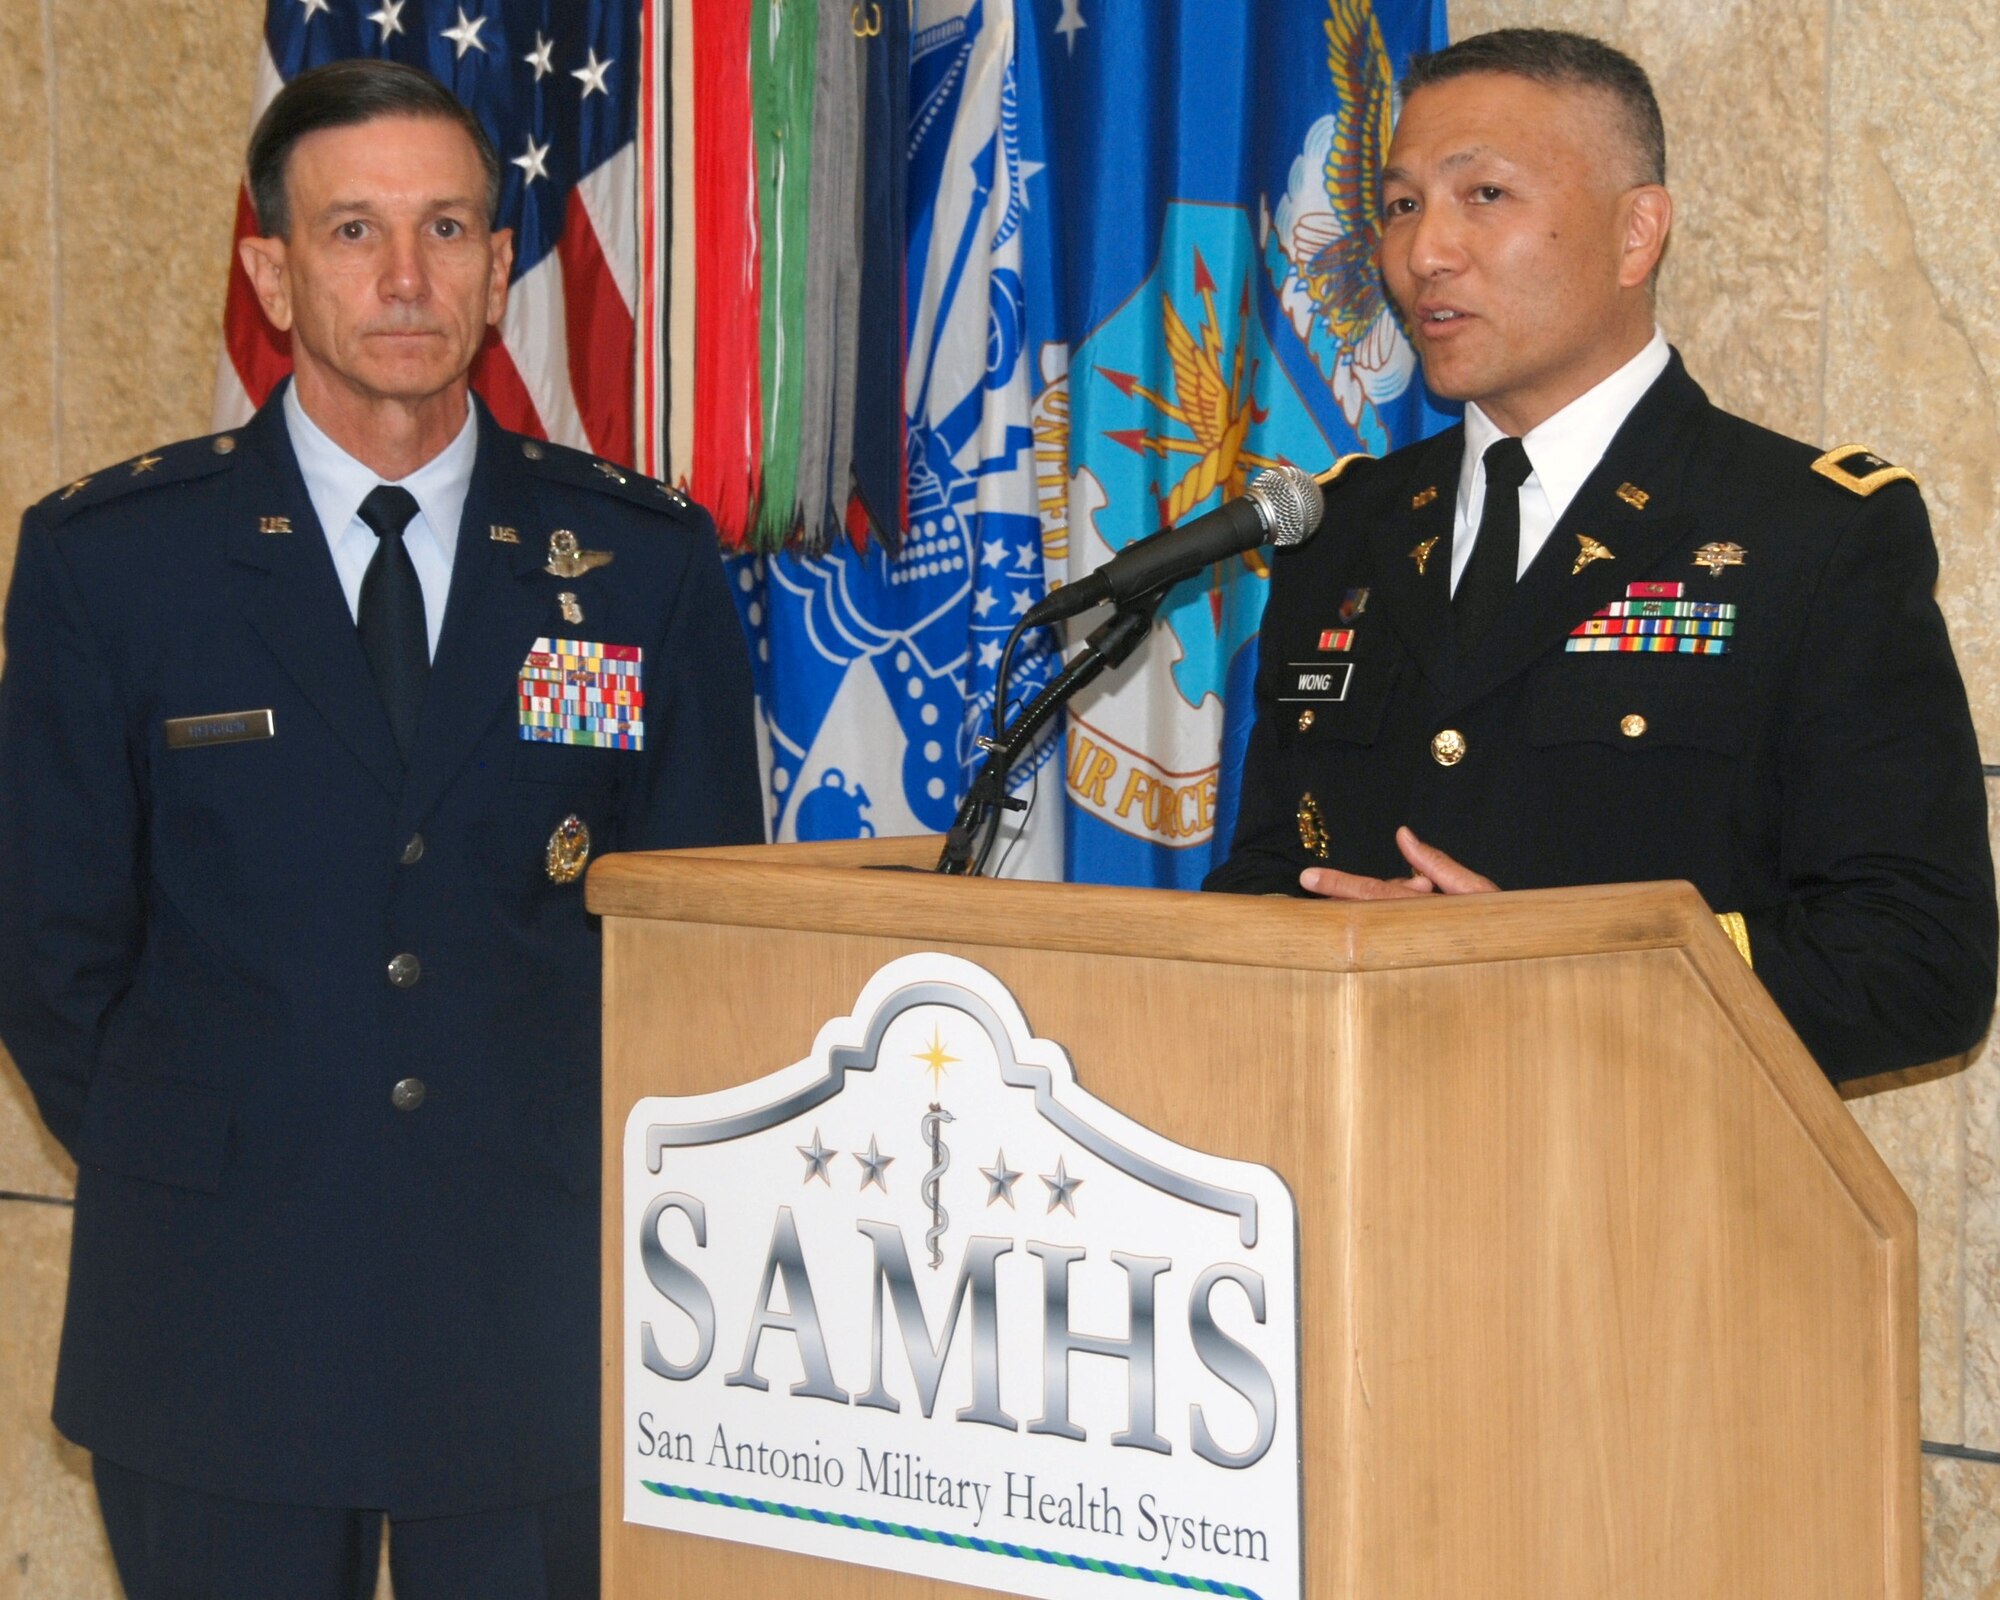 U.S. Air Force Maj. Gen. Byron Hepburn and Army Maj. Gen. M. Ted Wong
speak during the San Antonio Military Health System one-year anniversary at
the San Antonio Military Medical Center Sept. 14. Hepburn is the SAMHS
director and the 59th Medical Wing commander. Wong is the SAMHS deputy
director and Brooke Army Medical Center commander. Photo by Staff Sgt. Corey Hook